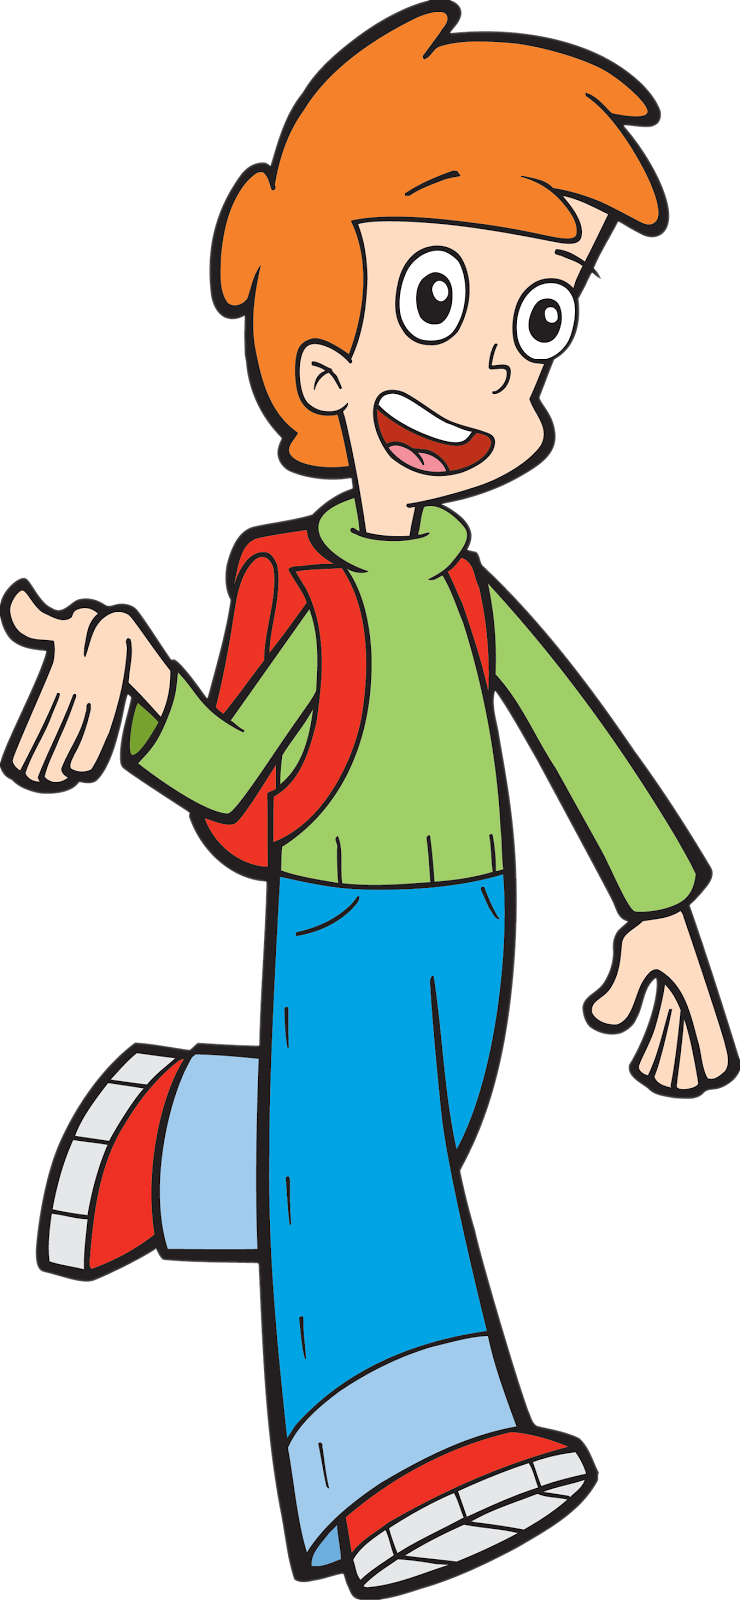 Download Go To Image - Cartoon Character Waving Png PNG Image with No  Background 